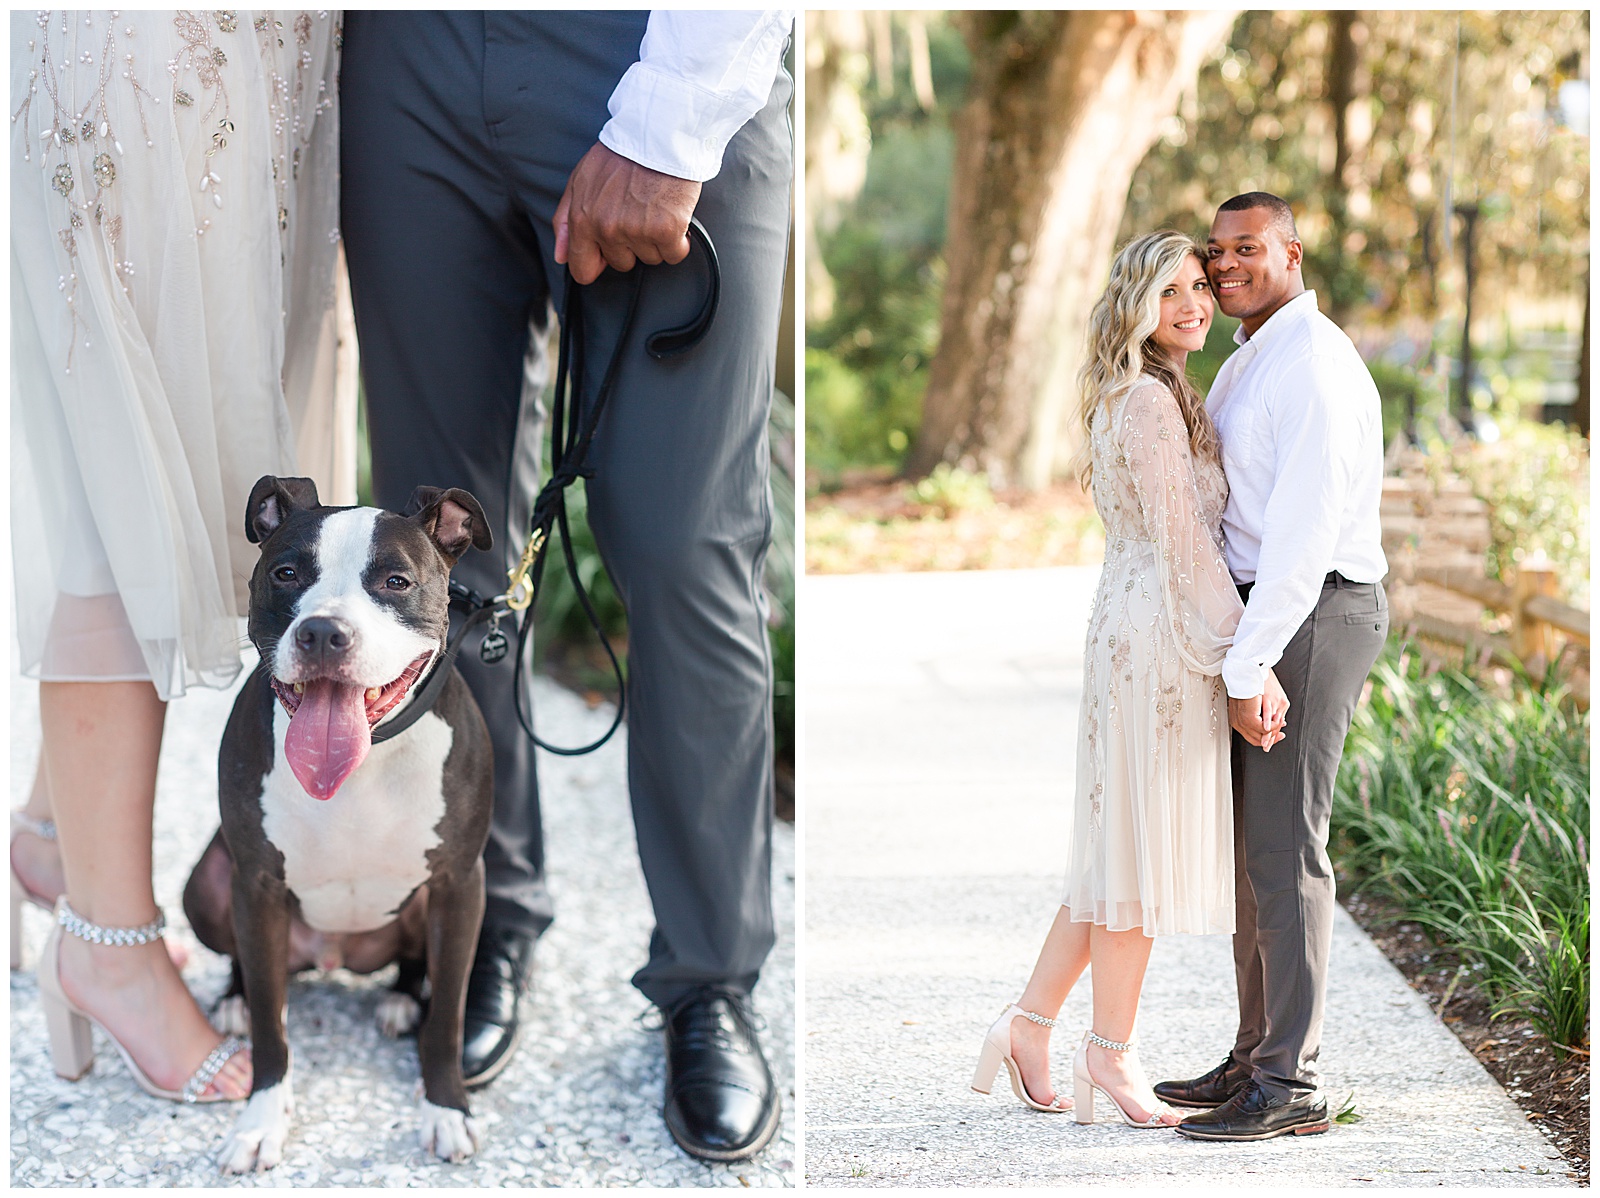 Engagement photography with dogs